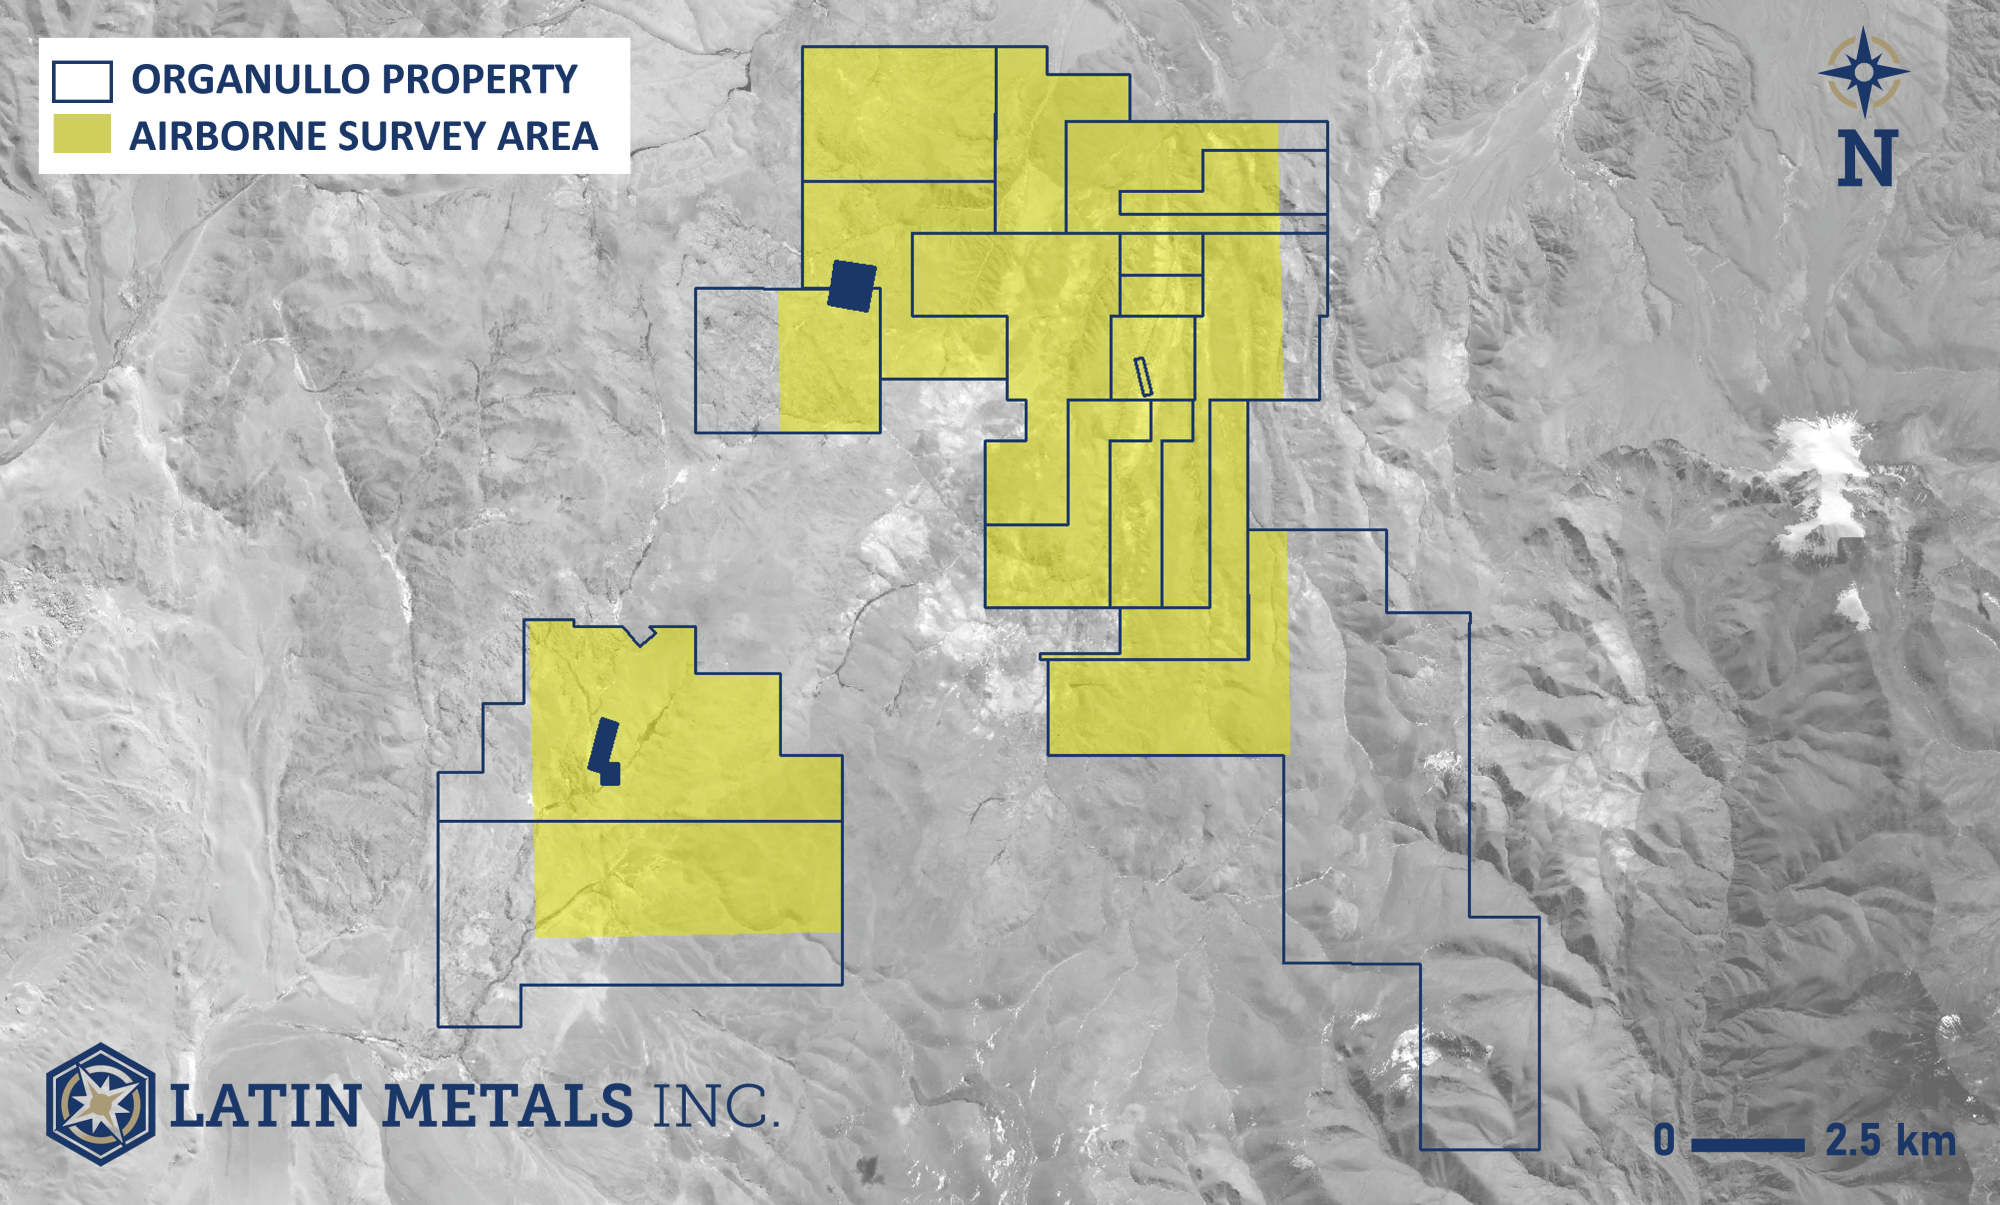 Latin Metals Completes Airborne Geophysical Survey Over Organulla Project